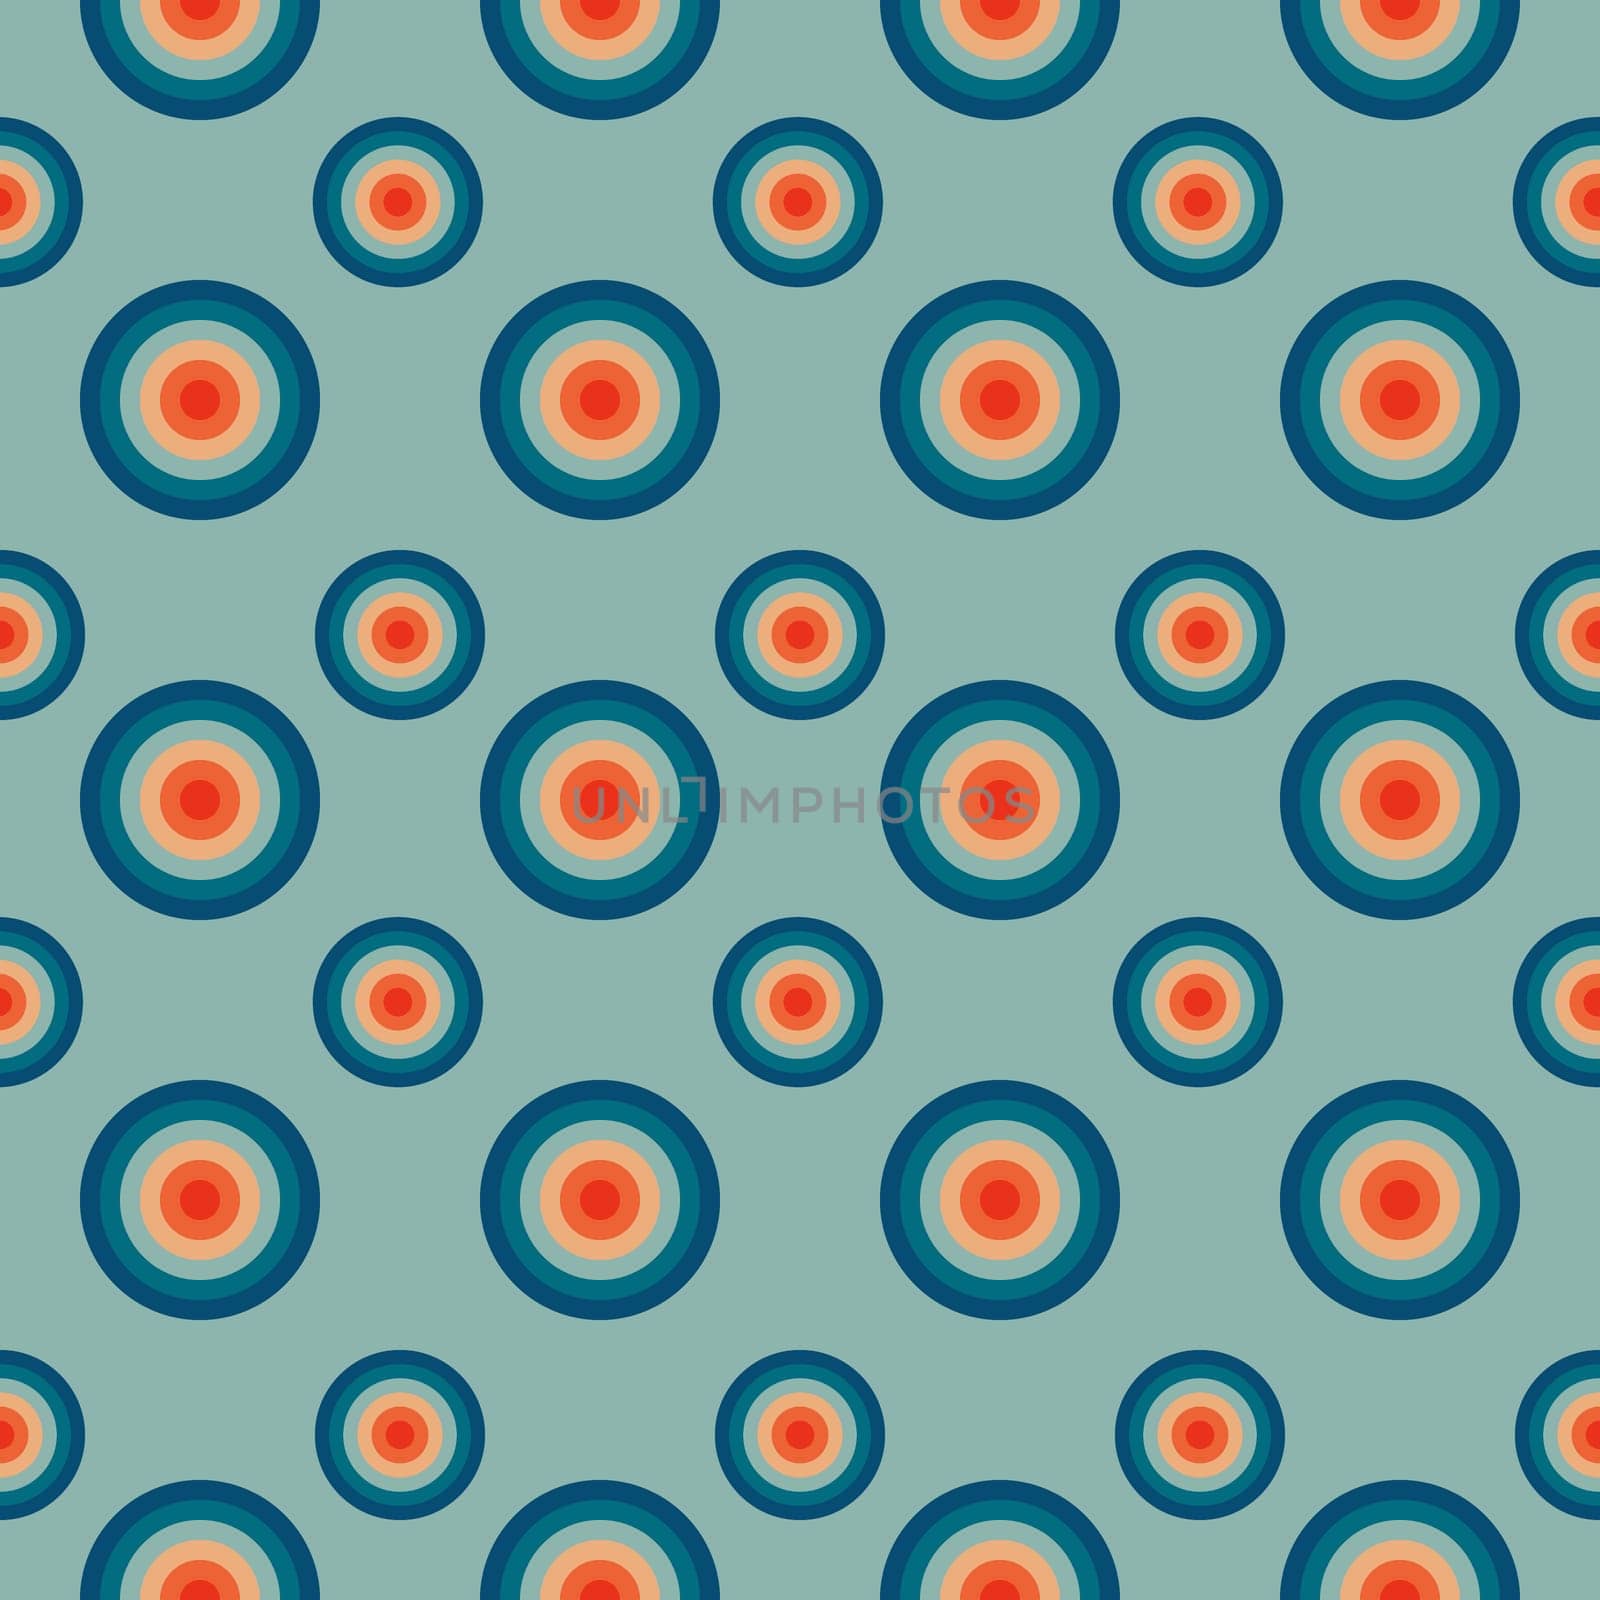 Vintage pattern with circles in the style of the 70s and 60s. by Dustick